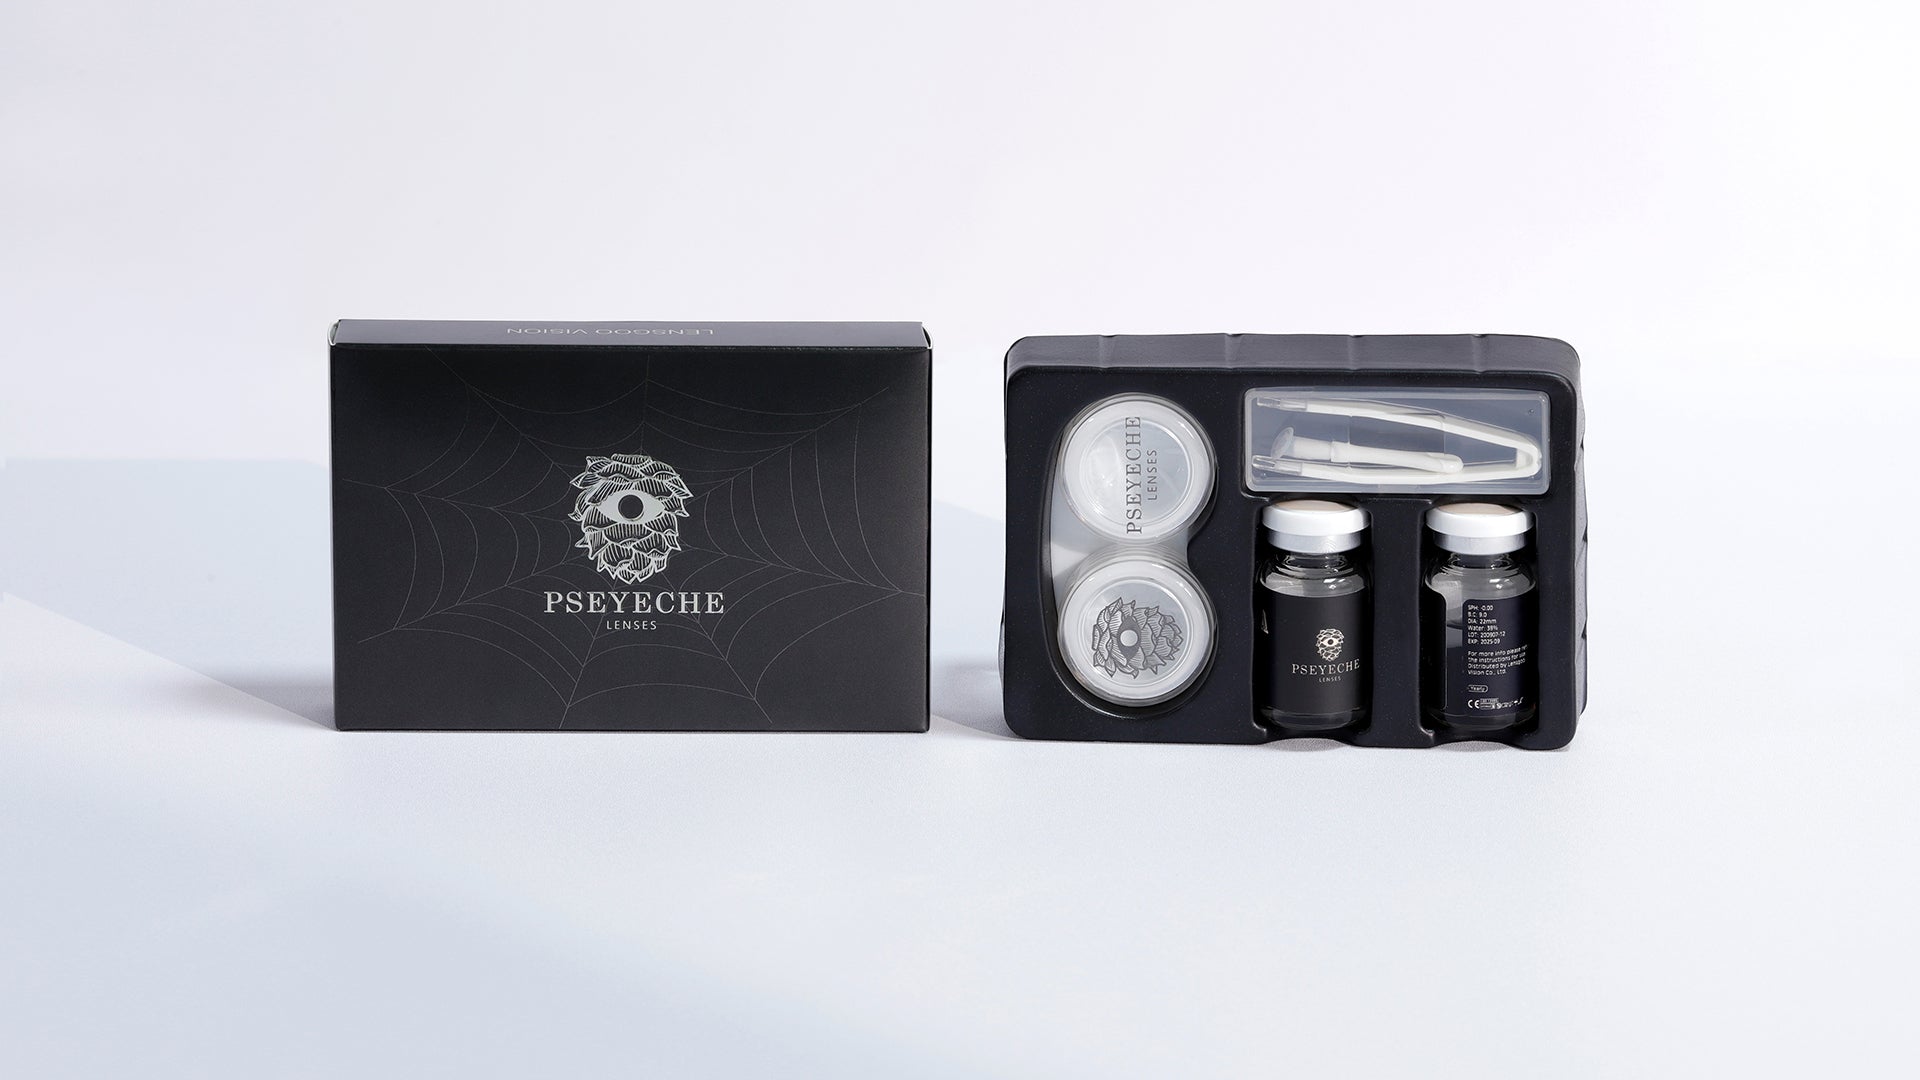 display a pseyeche Anime 22 mm sclera contact lenses black  package box with shine and beautiful pattern ,one box contain with 2pcs lenses( each packed in a glass bottle)+1 case+1 plastic tray+1 case+1 tweezer+1 stick